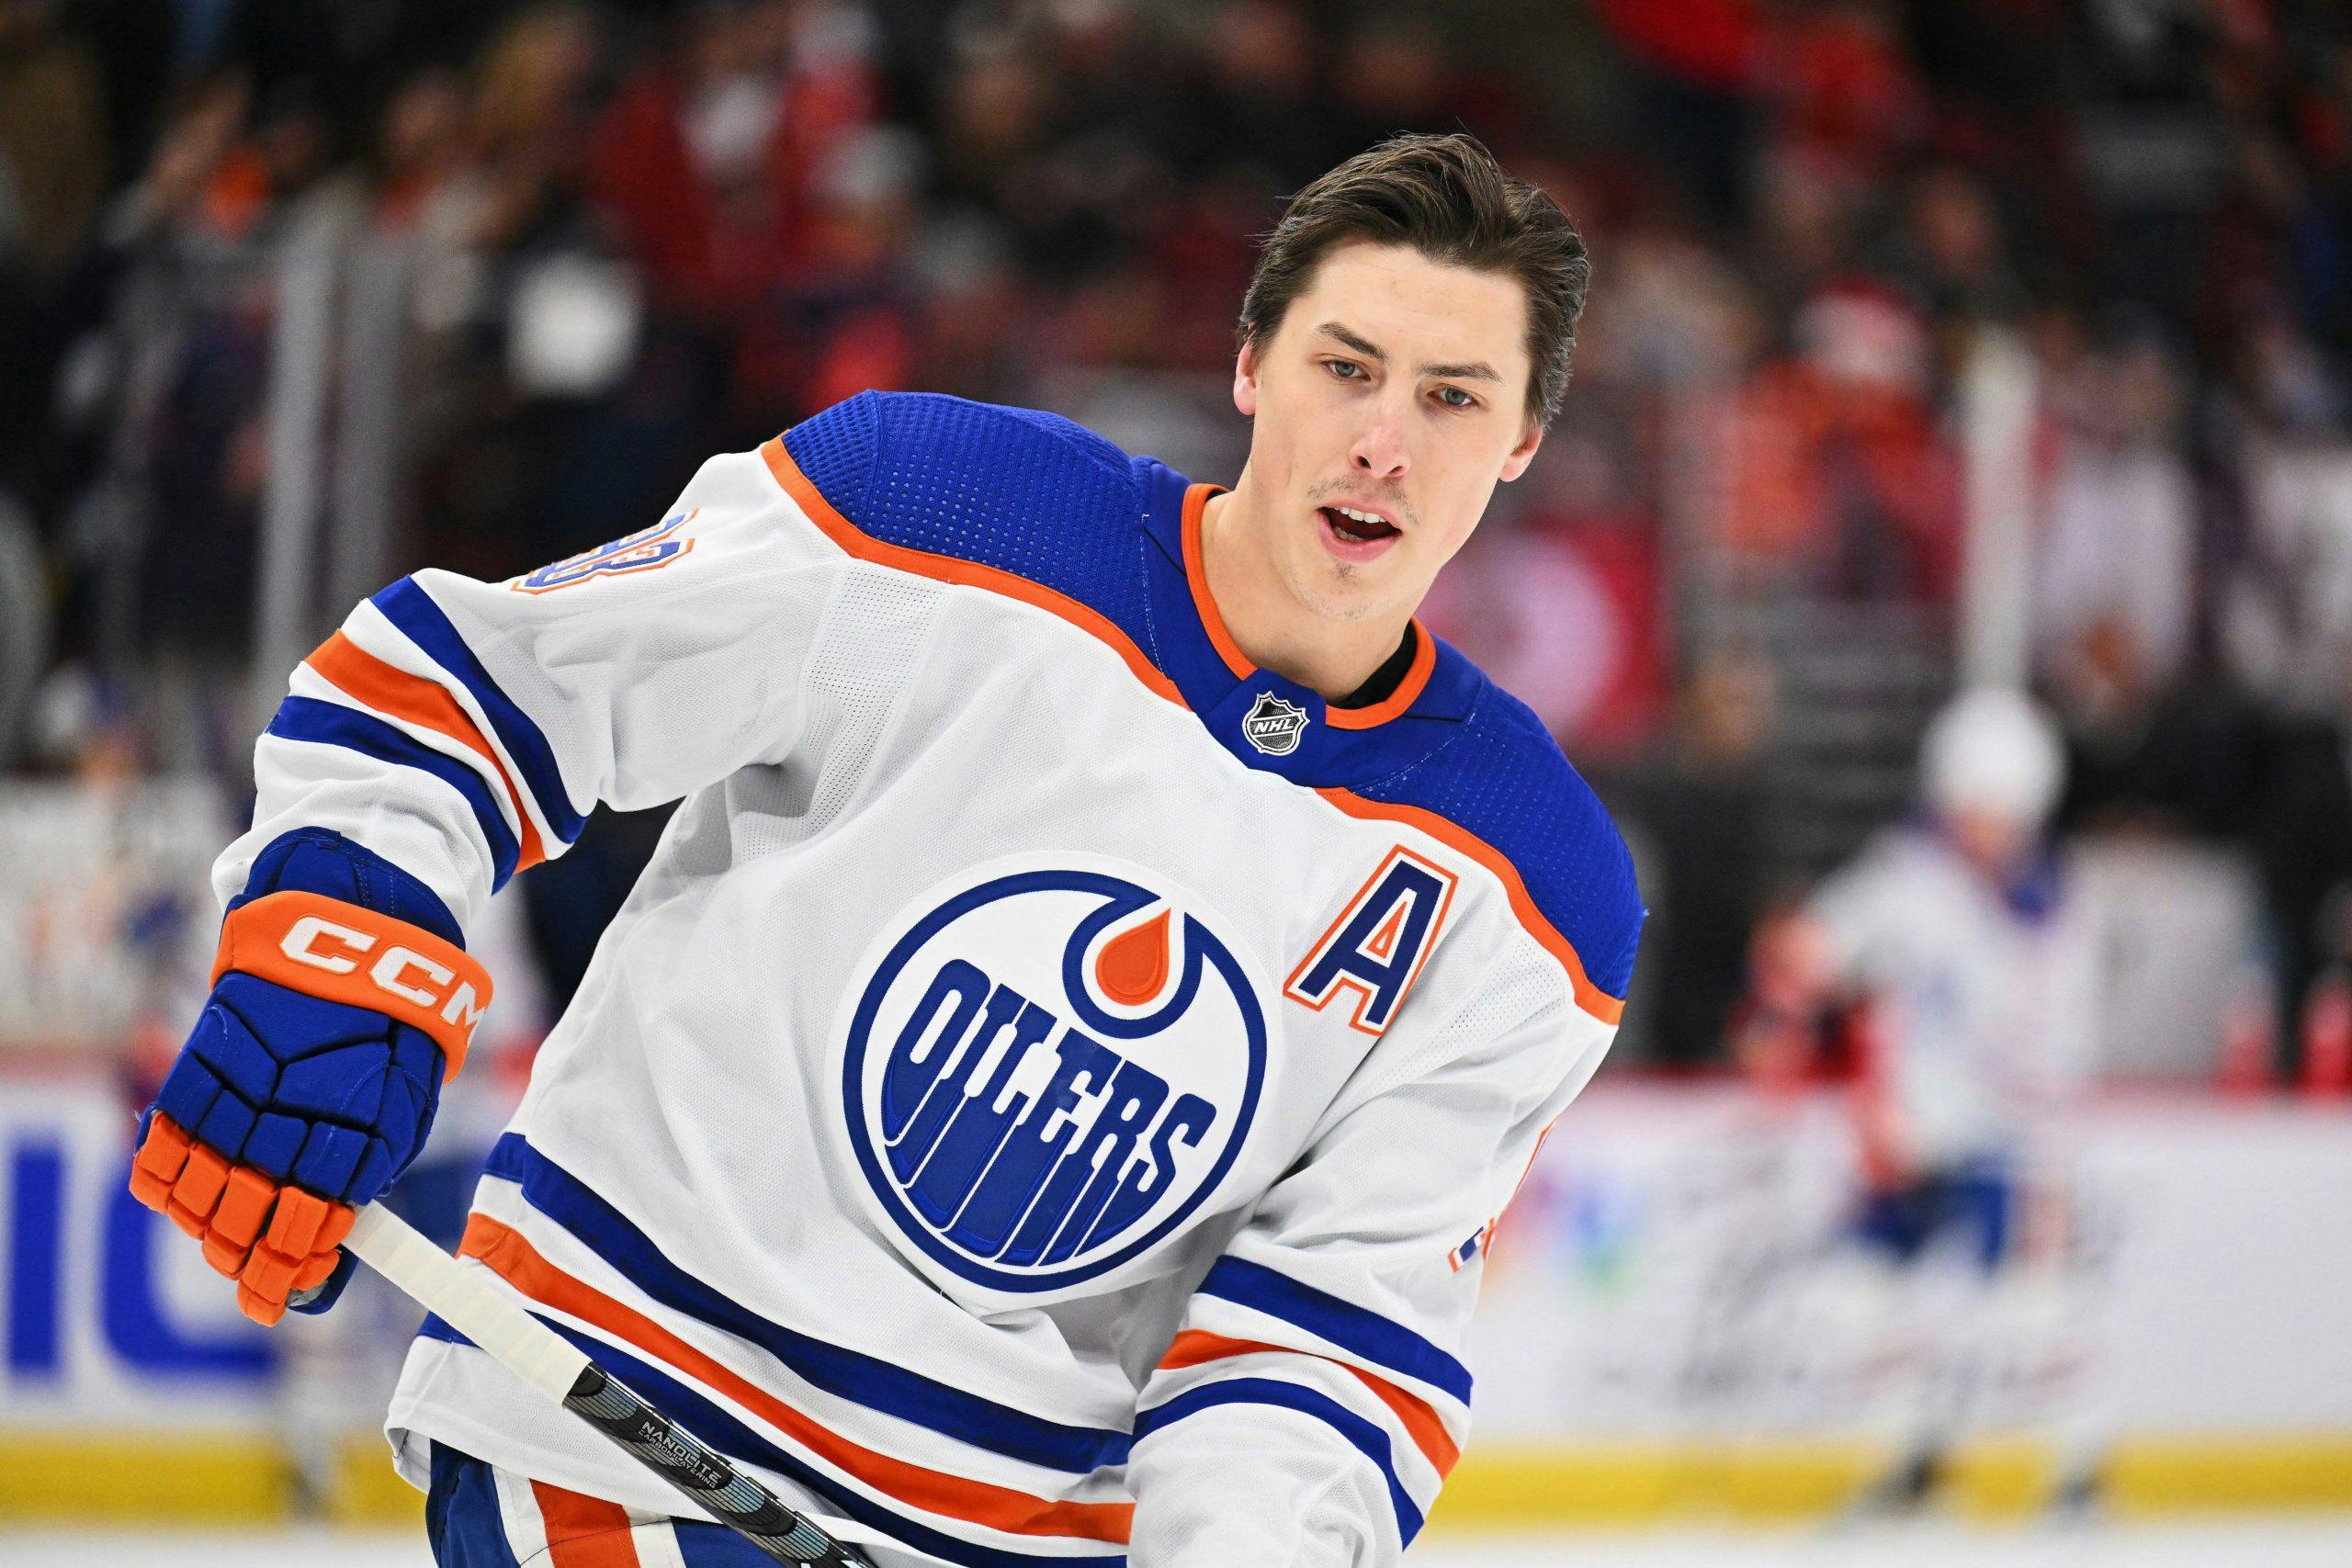 Ryan Nugent-Hopkins plays in his 800th NHL game - OilersNation